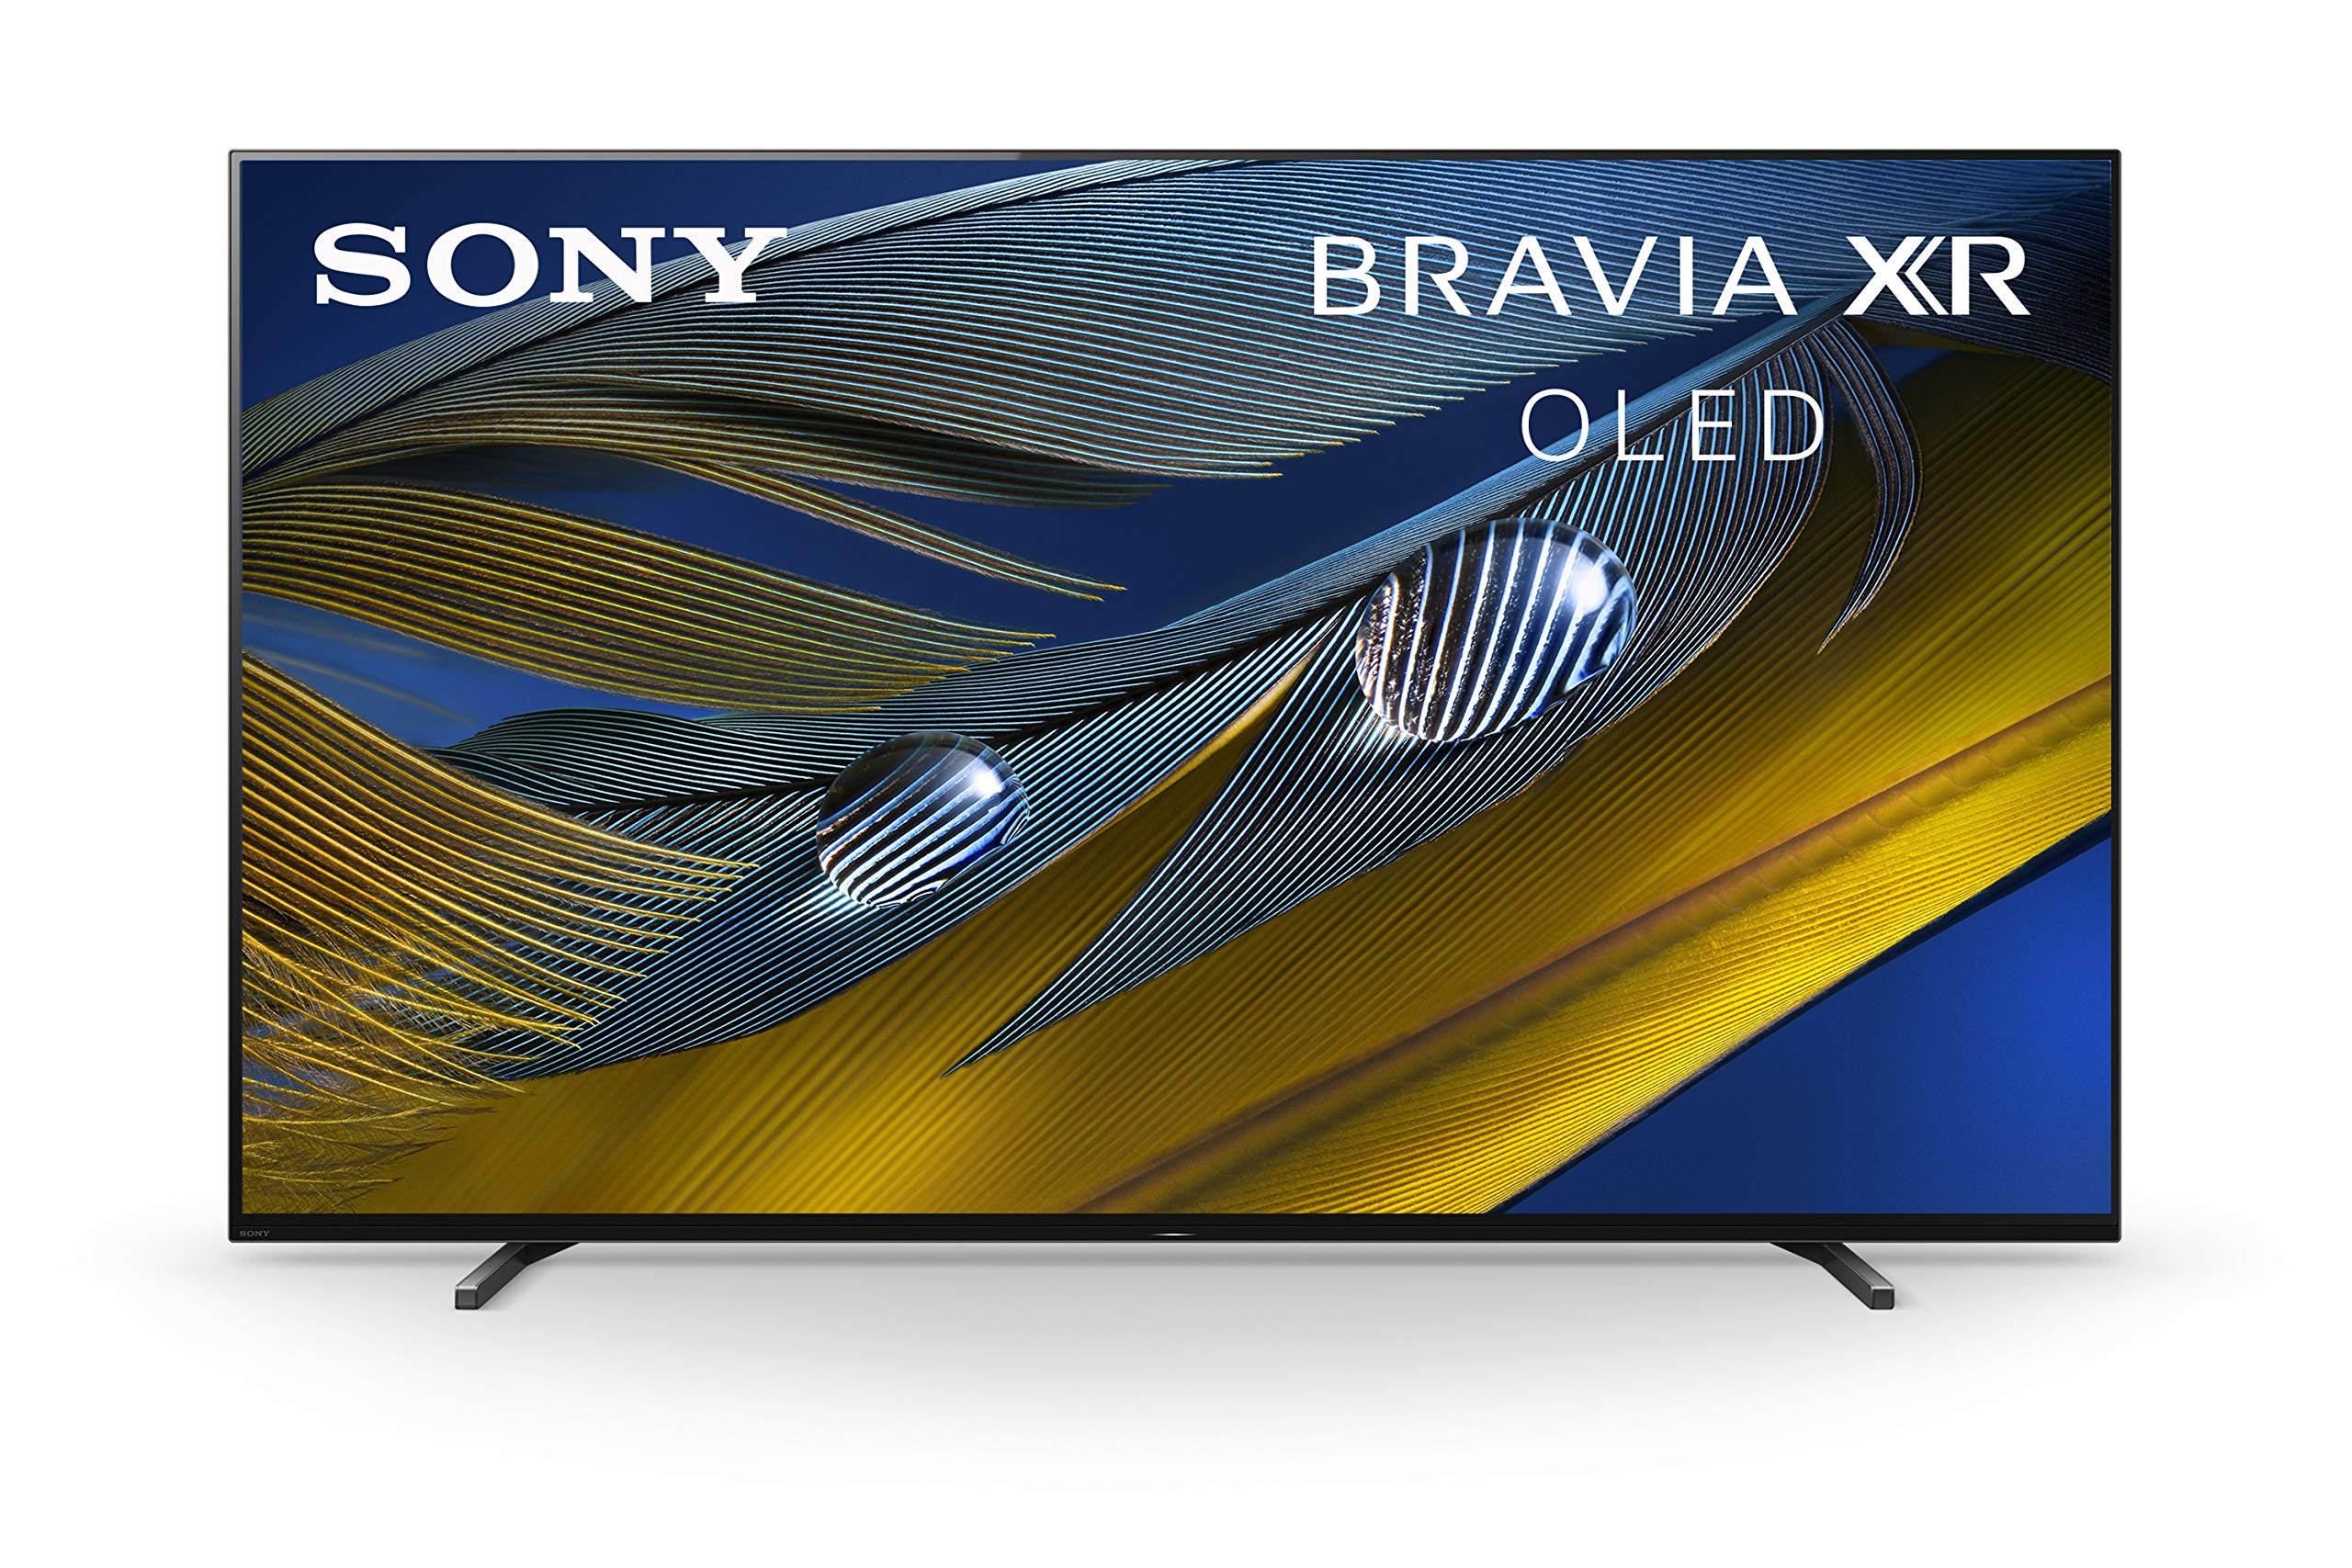 Sony A80J 65 Inch TV: BRAVIA XR OLED 4K Ultra HD Smart Google TV with Dolby Vision HDR and Alexa Compatibility XR65A80J- 2021 Model, Black